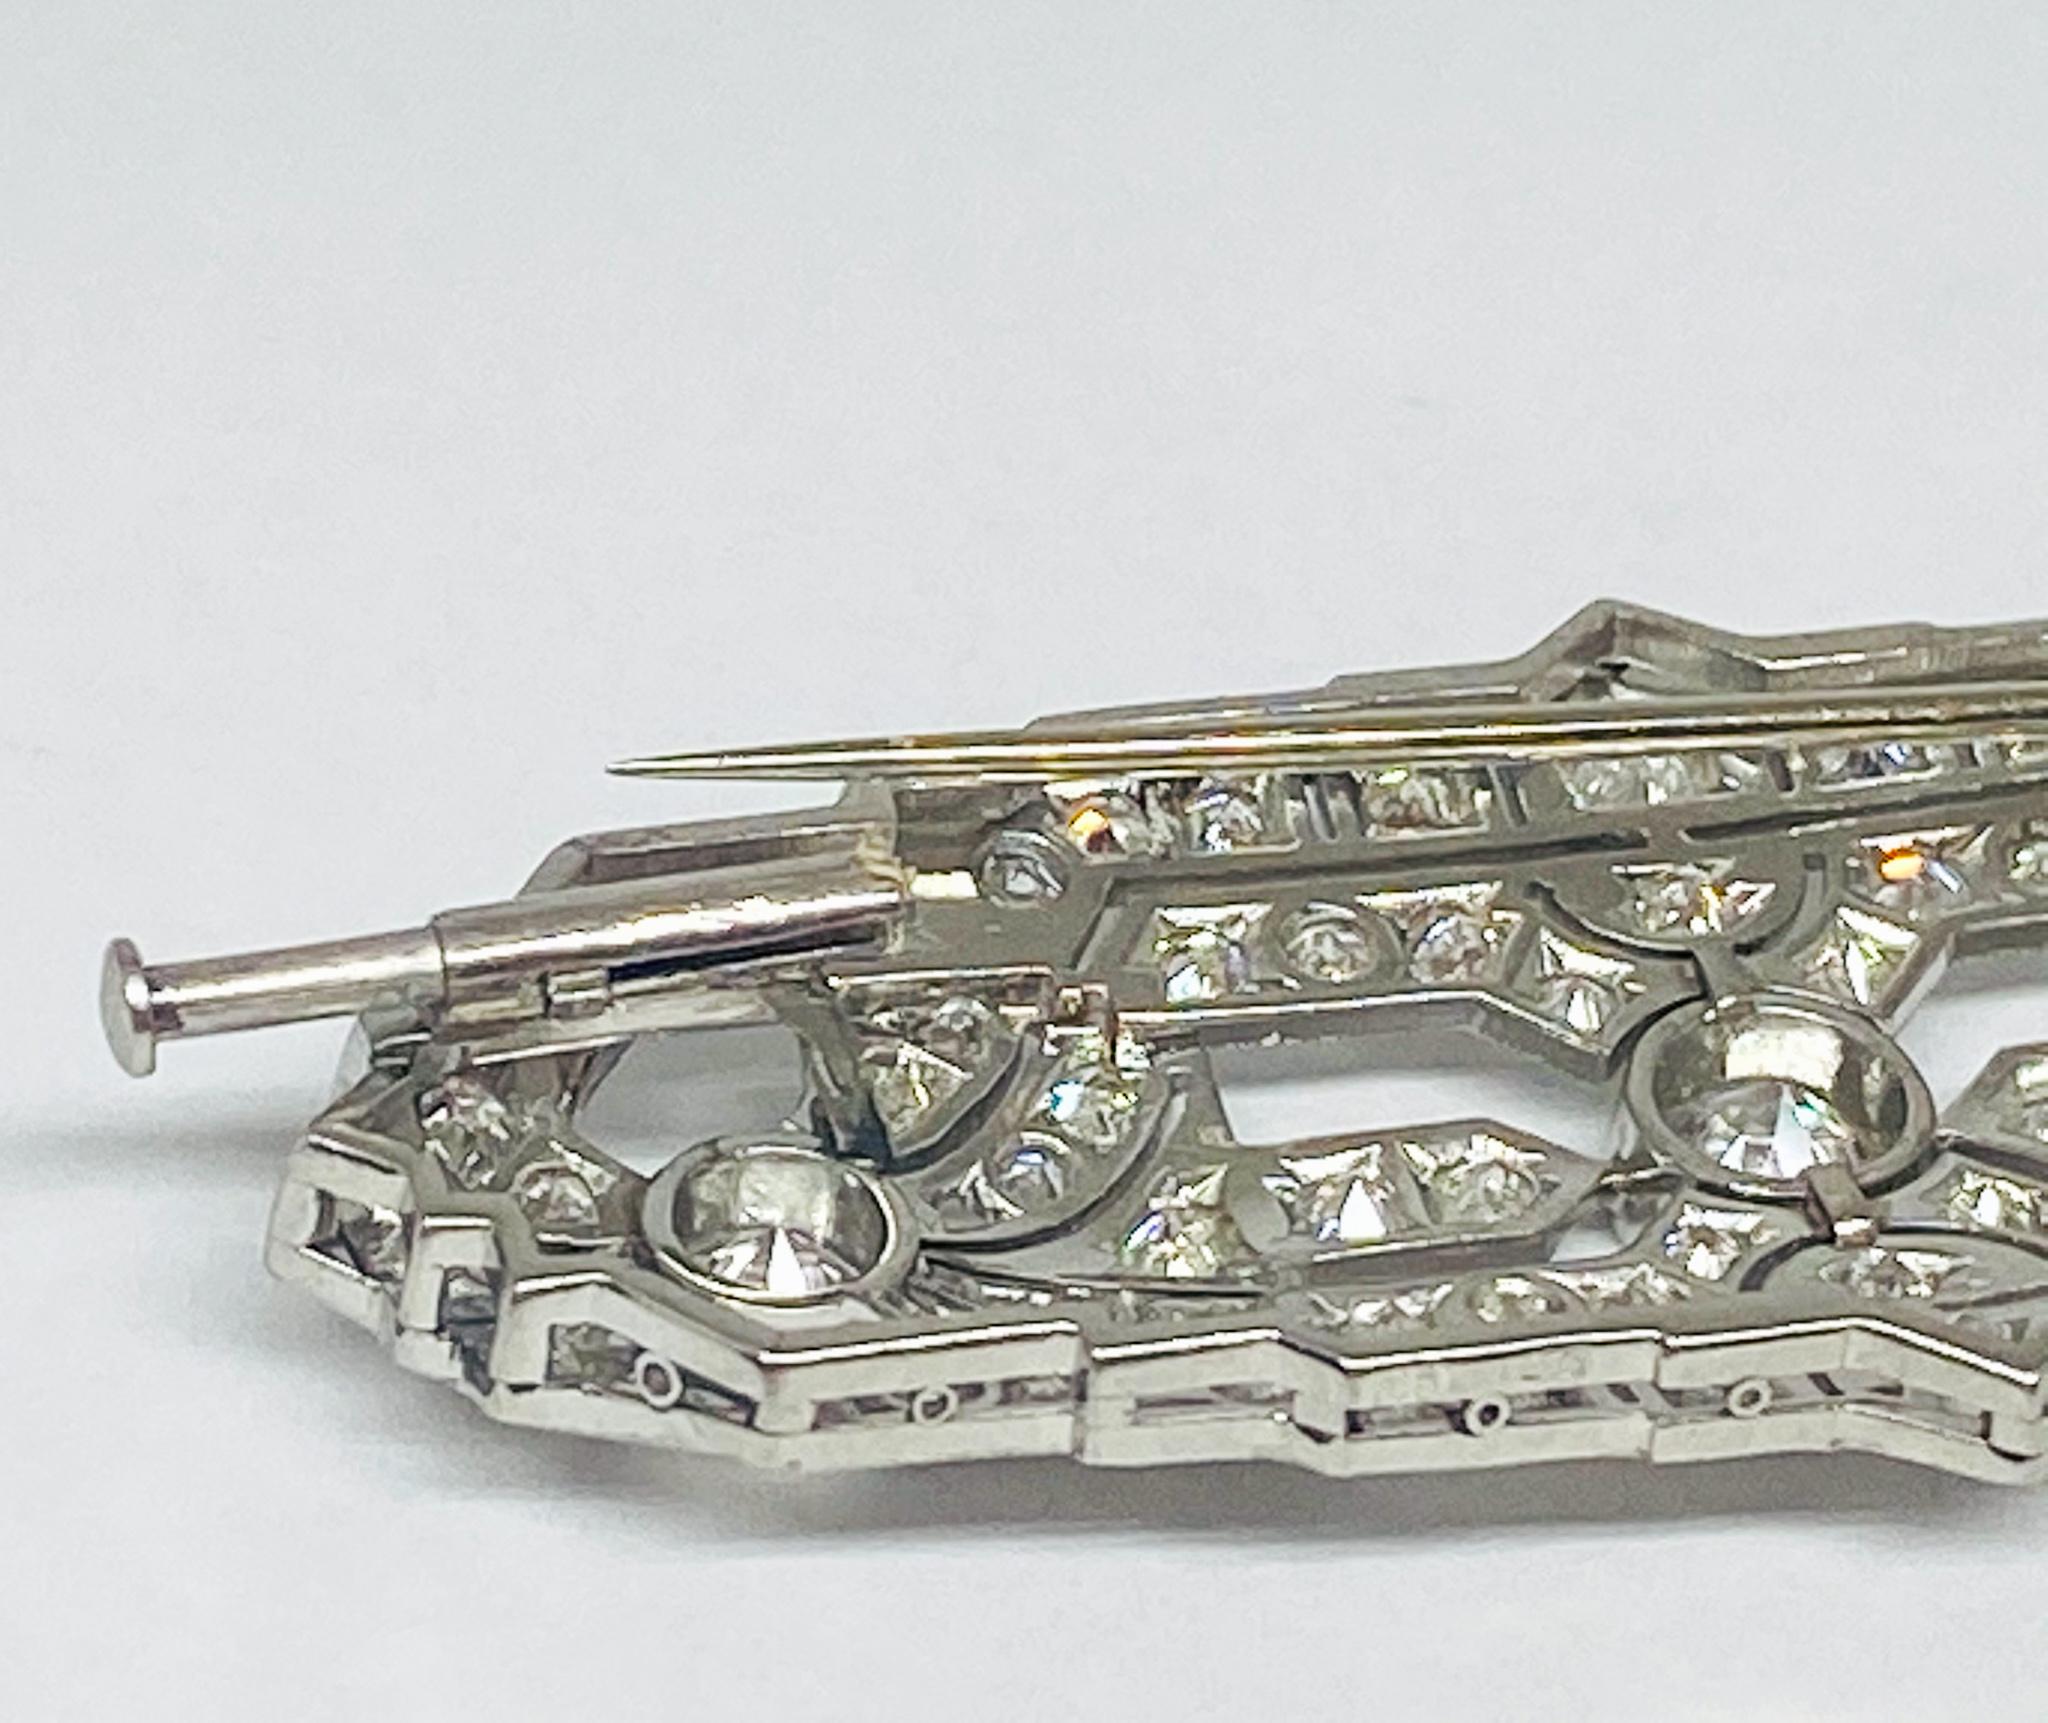 Ornately designed antique brooch from the 1920's in impeccable condition featuring a beautiful collection of round cut white diamonds weighing 4.2 carats with a I color grade and a VVS clarity grade all set in milgrain beading in a very intricate